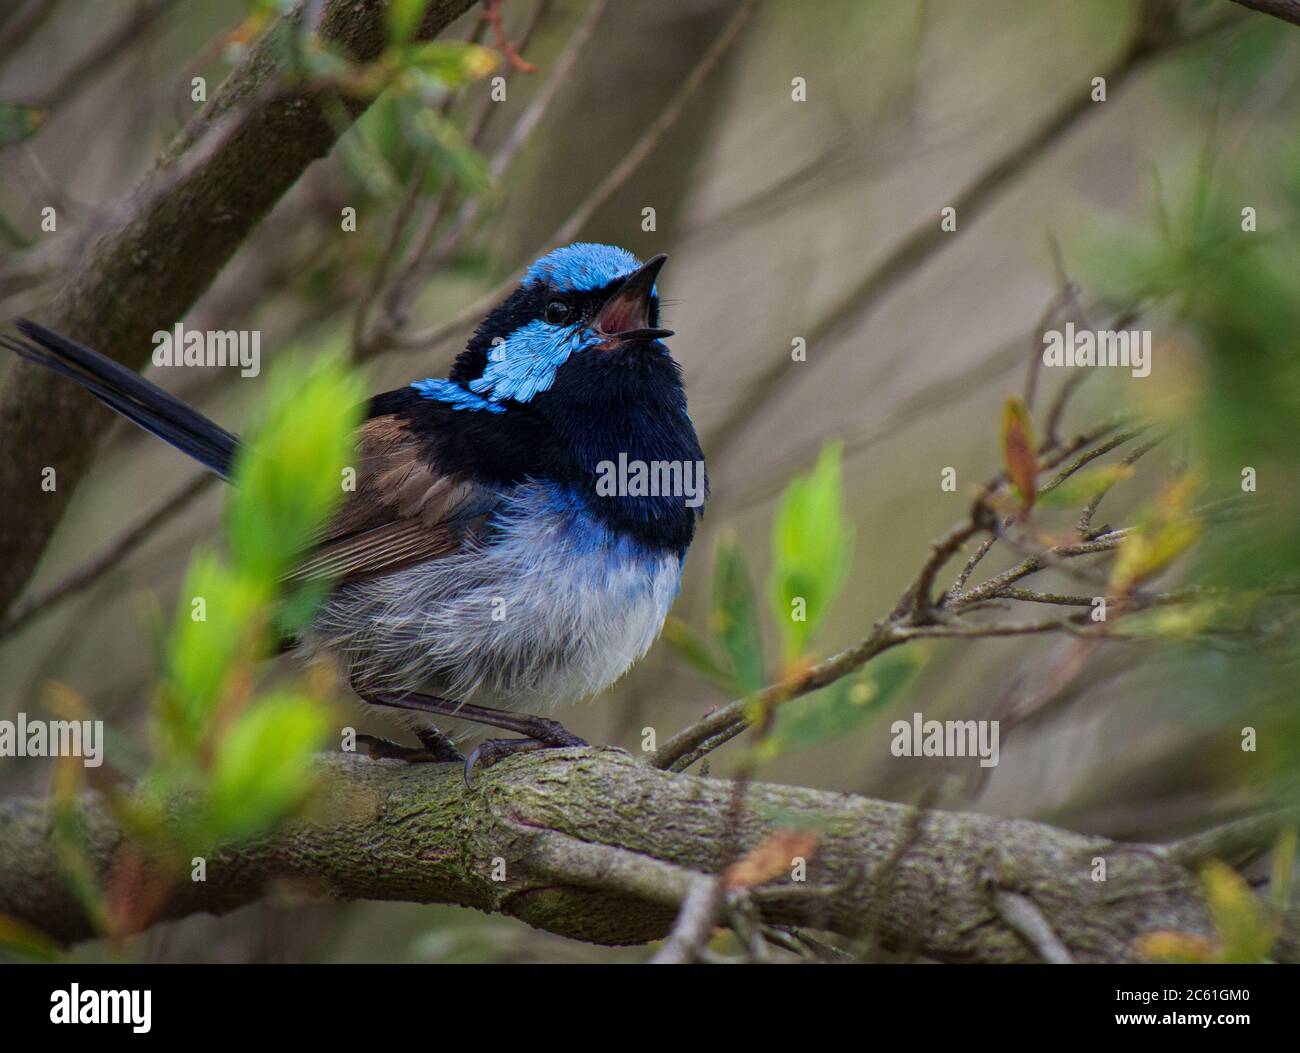 A Male Blue Fairy Wren sitting in a Tree at the Coast Stock Photo